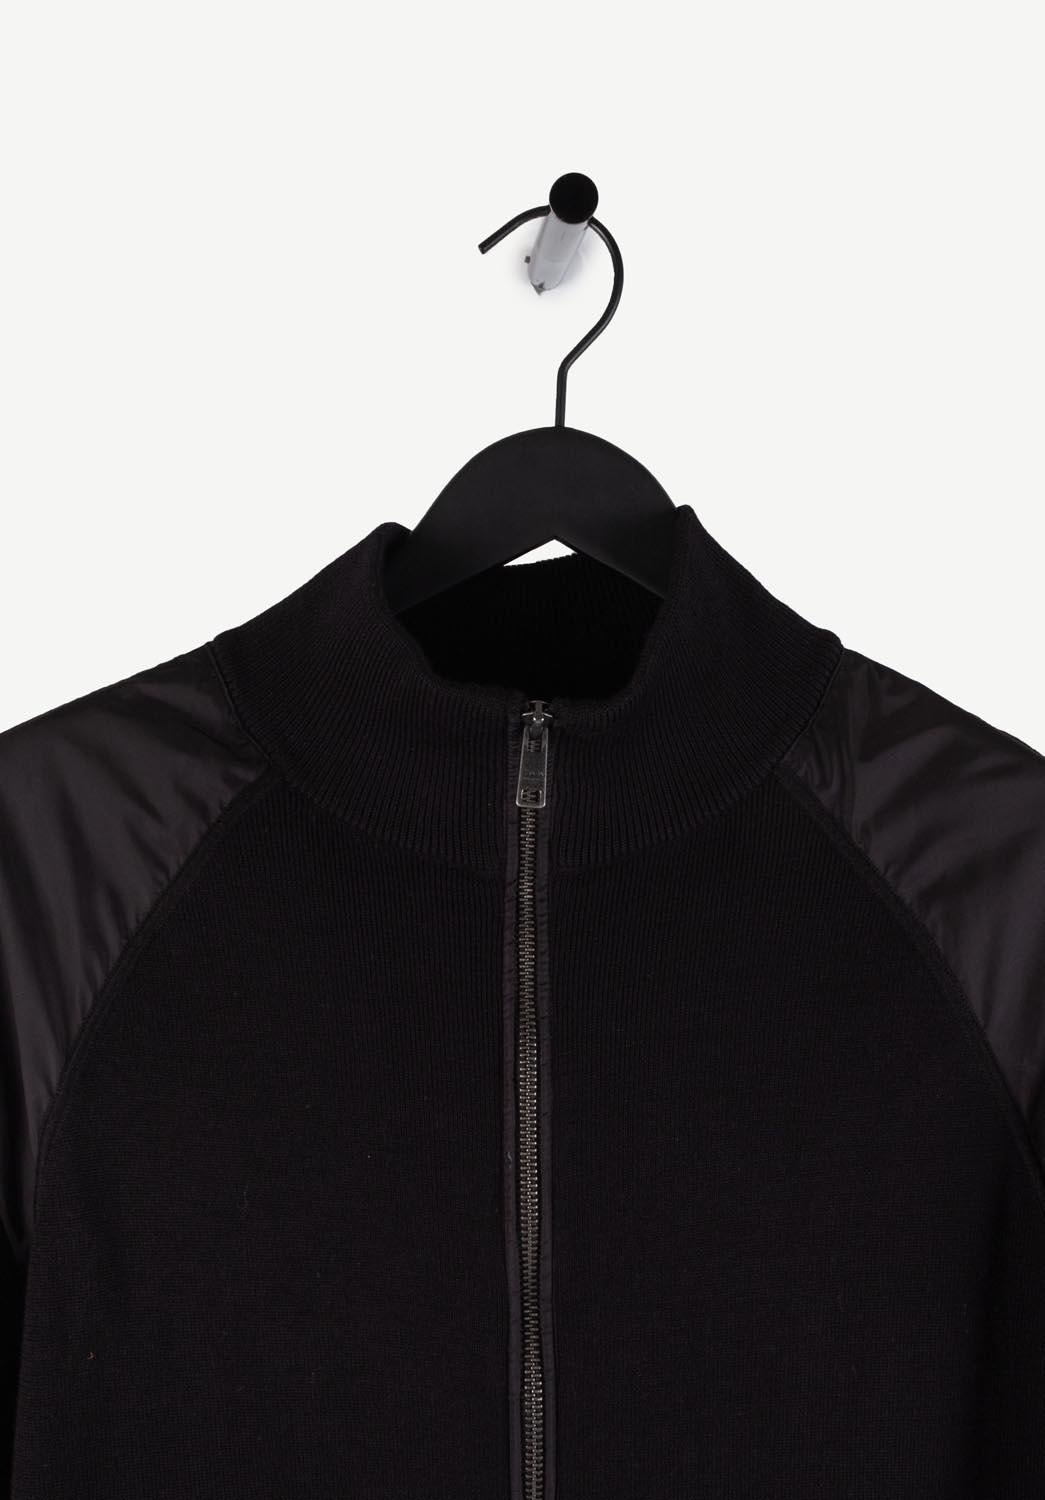 Item for sale is 100% genuine Prada Wool Zipped Sweater/Jacket, S303
Color: Black
(An actual color may a bit vary due to individual computer screen interpretation)
Material: 100% wool/100% polyamide
Tag size: 50IT (runs Medium)
This jacket is great